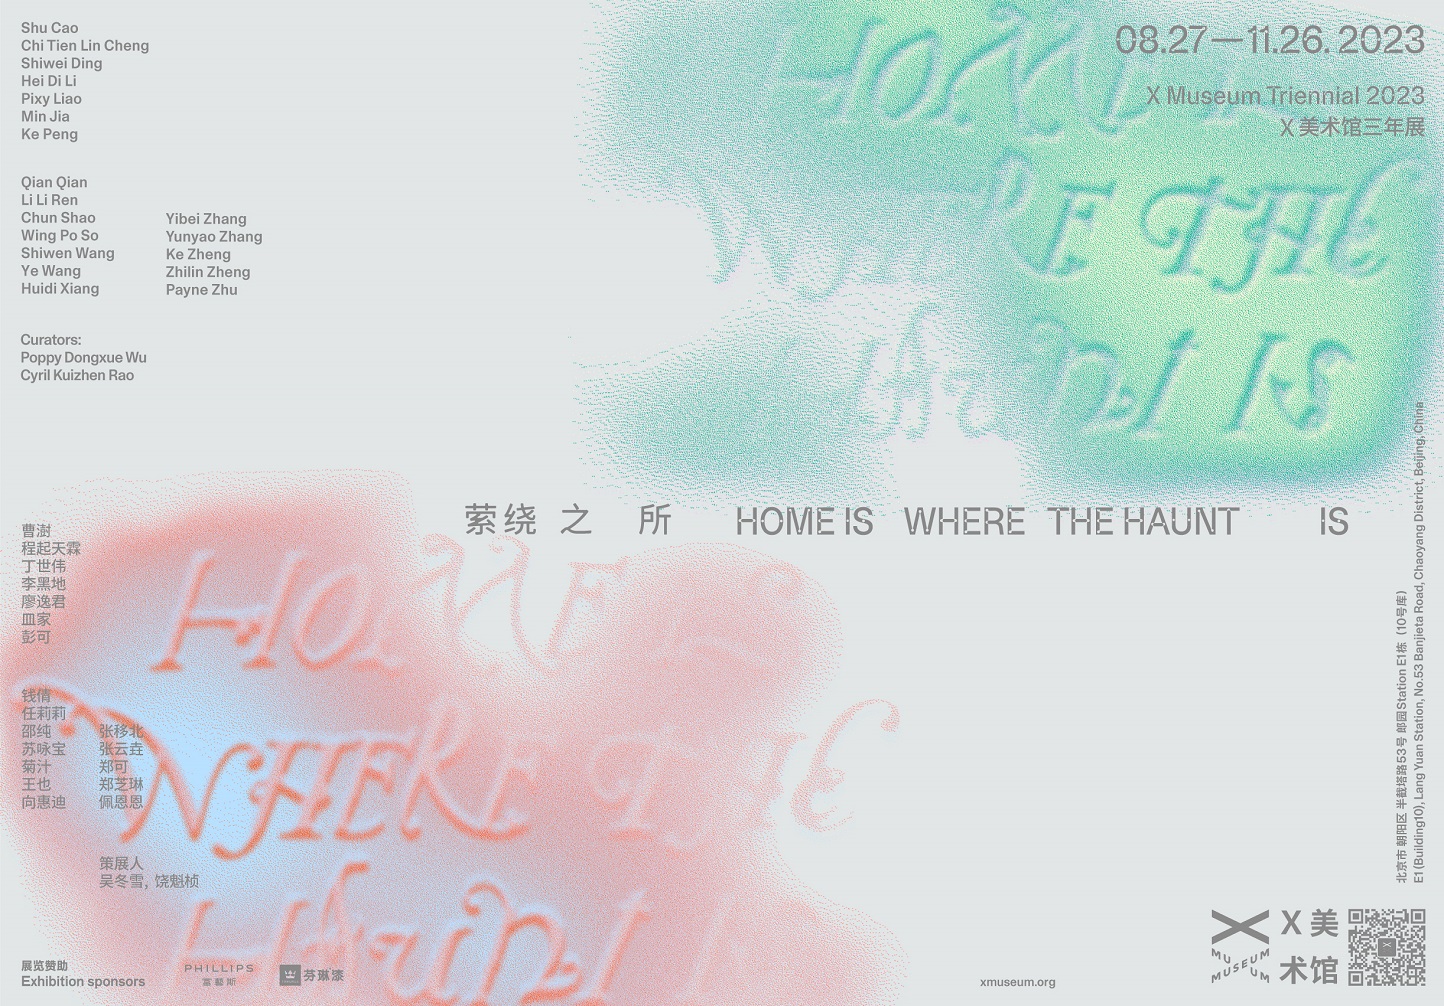 So Wing Po’s and Pixy Liao’s works at X Museum Triennial 2023 exhibition “Home Is Where the Haunt Is”